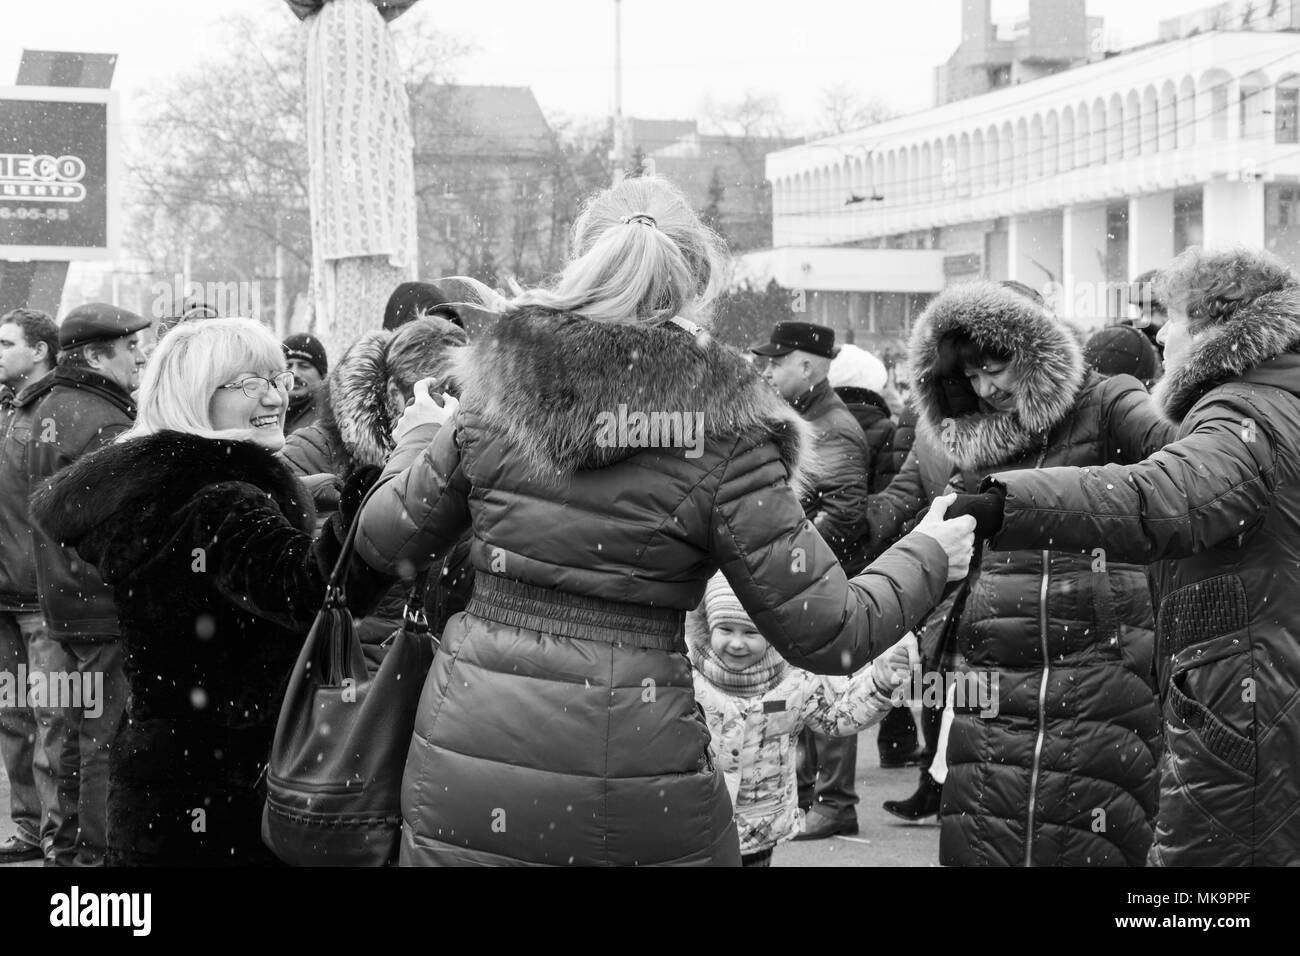 Women, men and children are dancing in the square in the center of Tiraspol, Moldova at the Shrovetide Festival. The reportage photo is black and whit Stock Photo